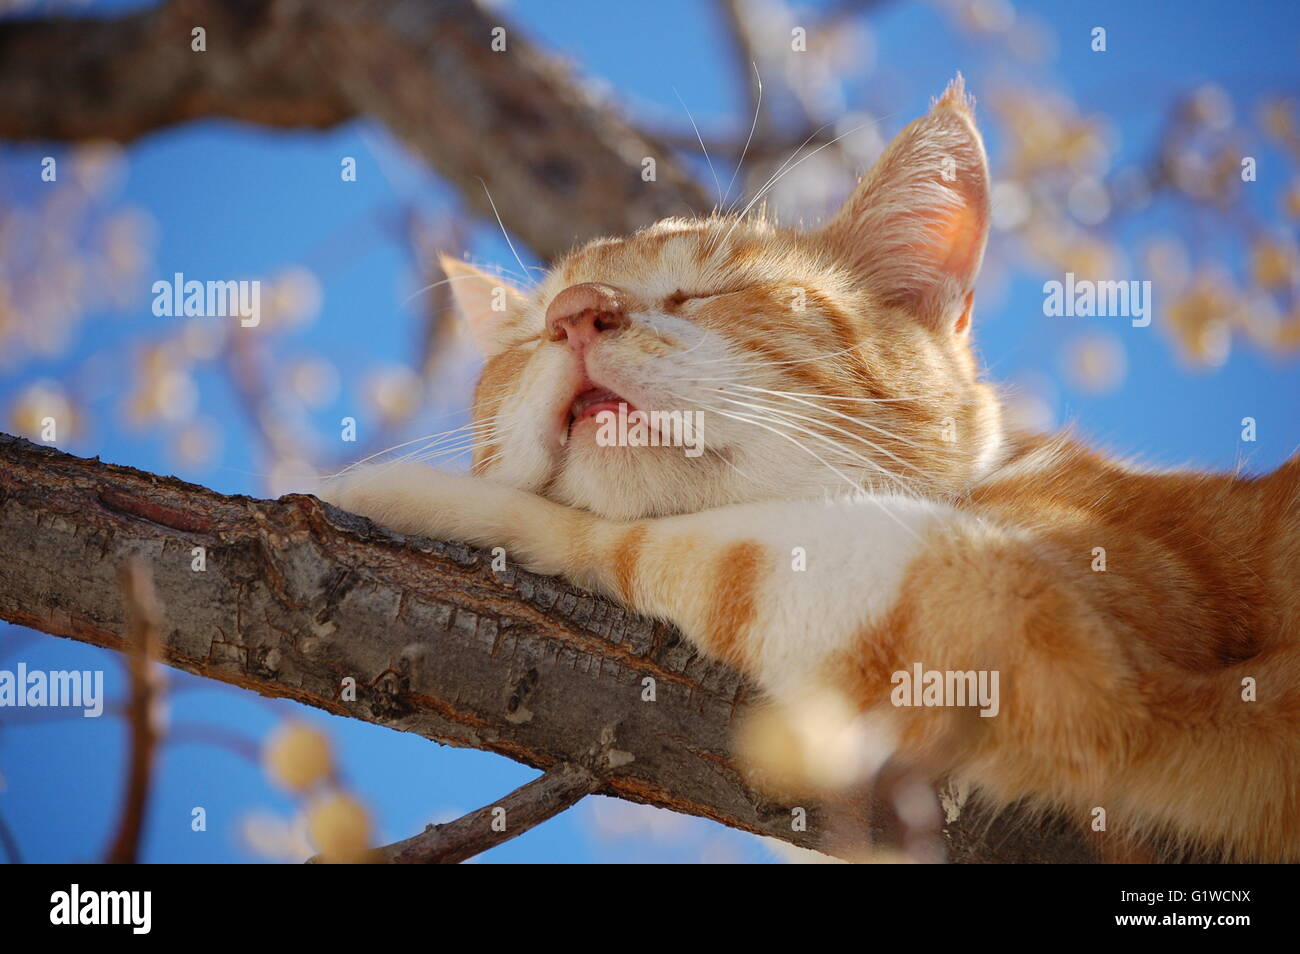 Cat sleeping peacefully on tree branch in the sunlight. Stock Photo